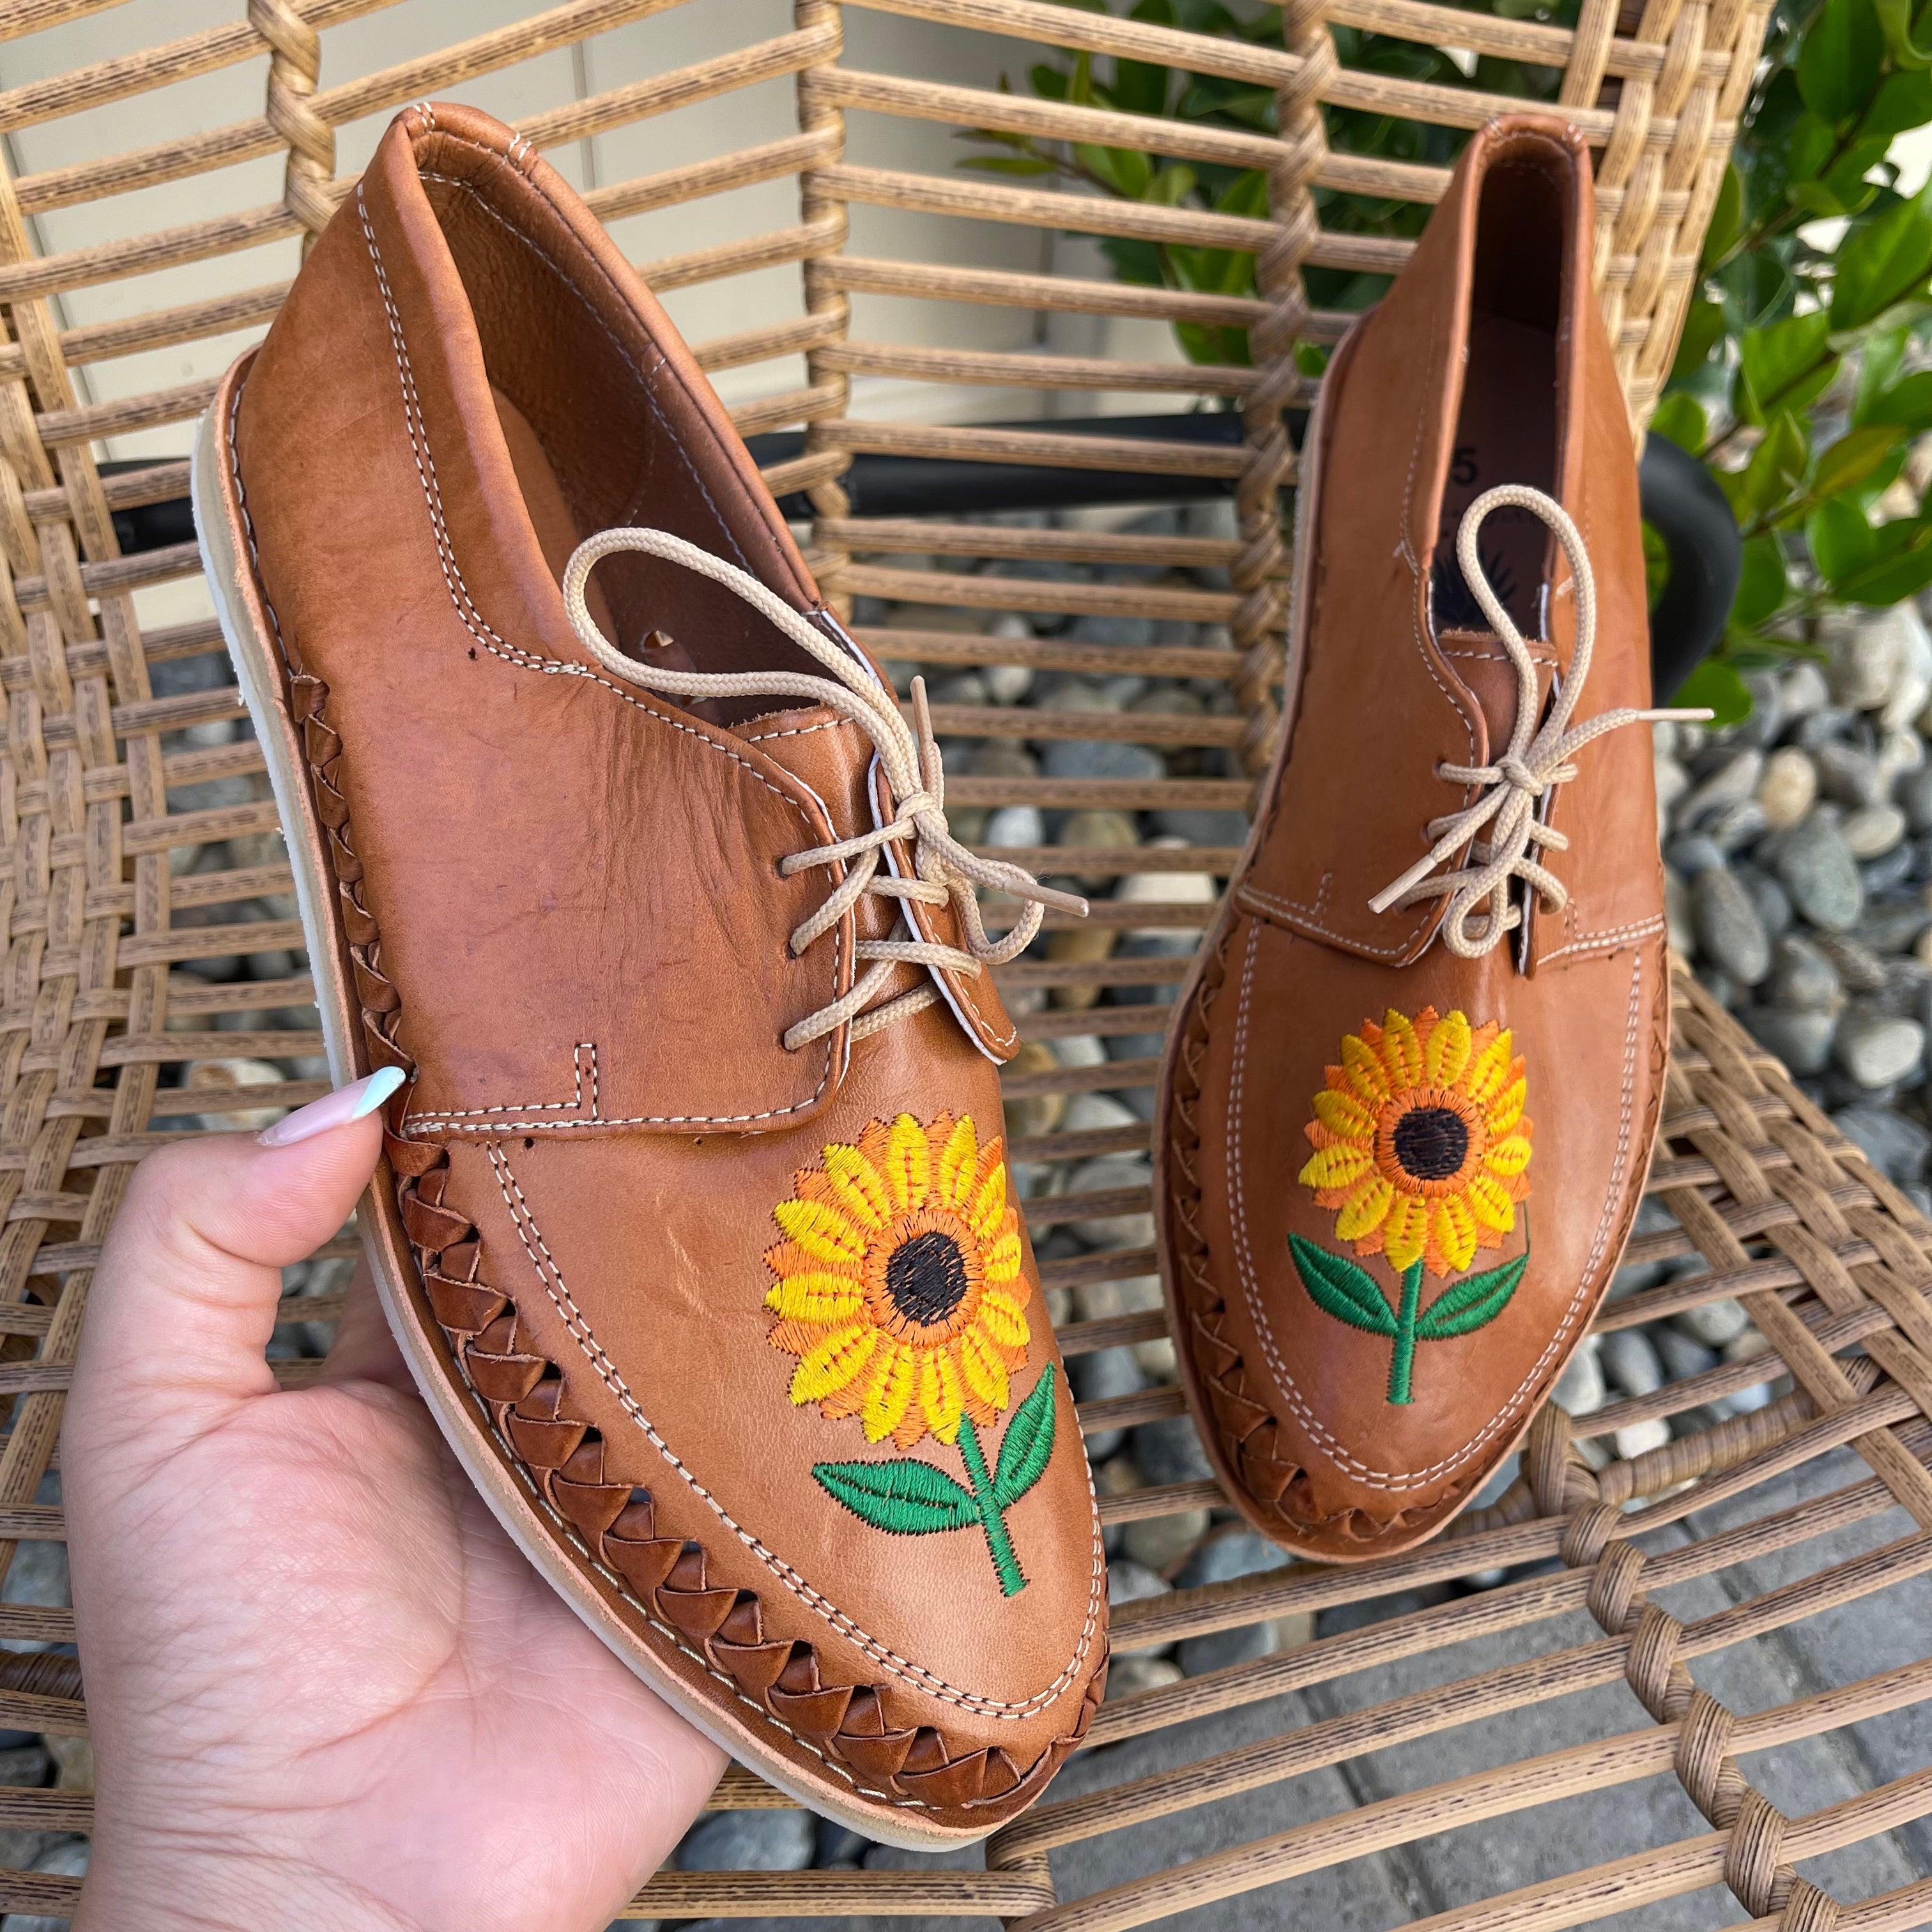 Sunflower Embroidered Loafers